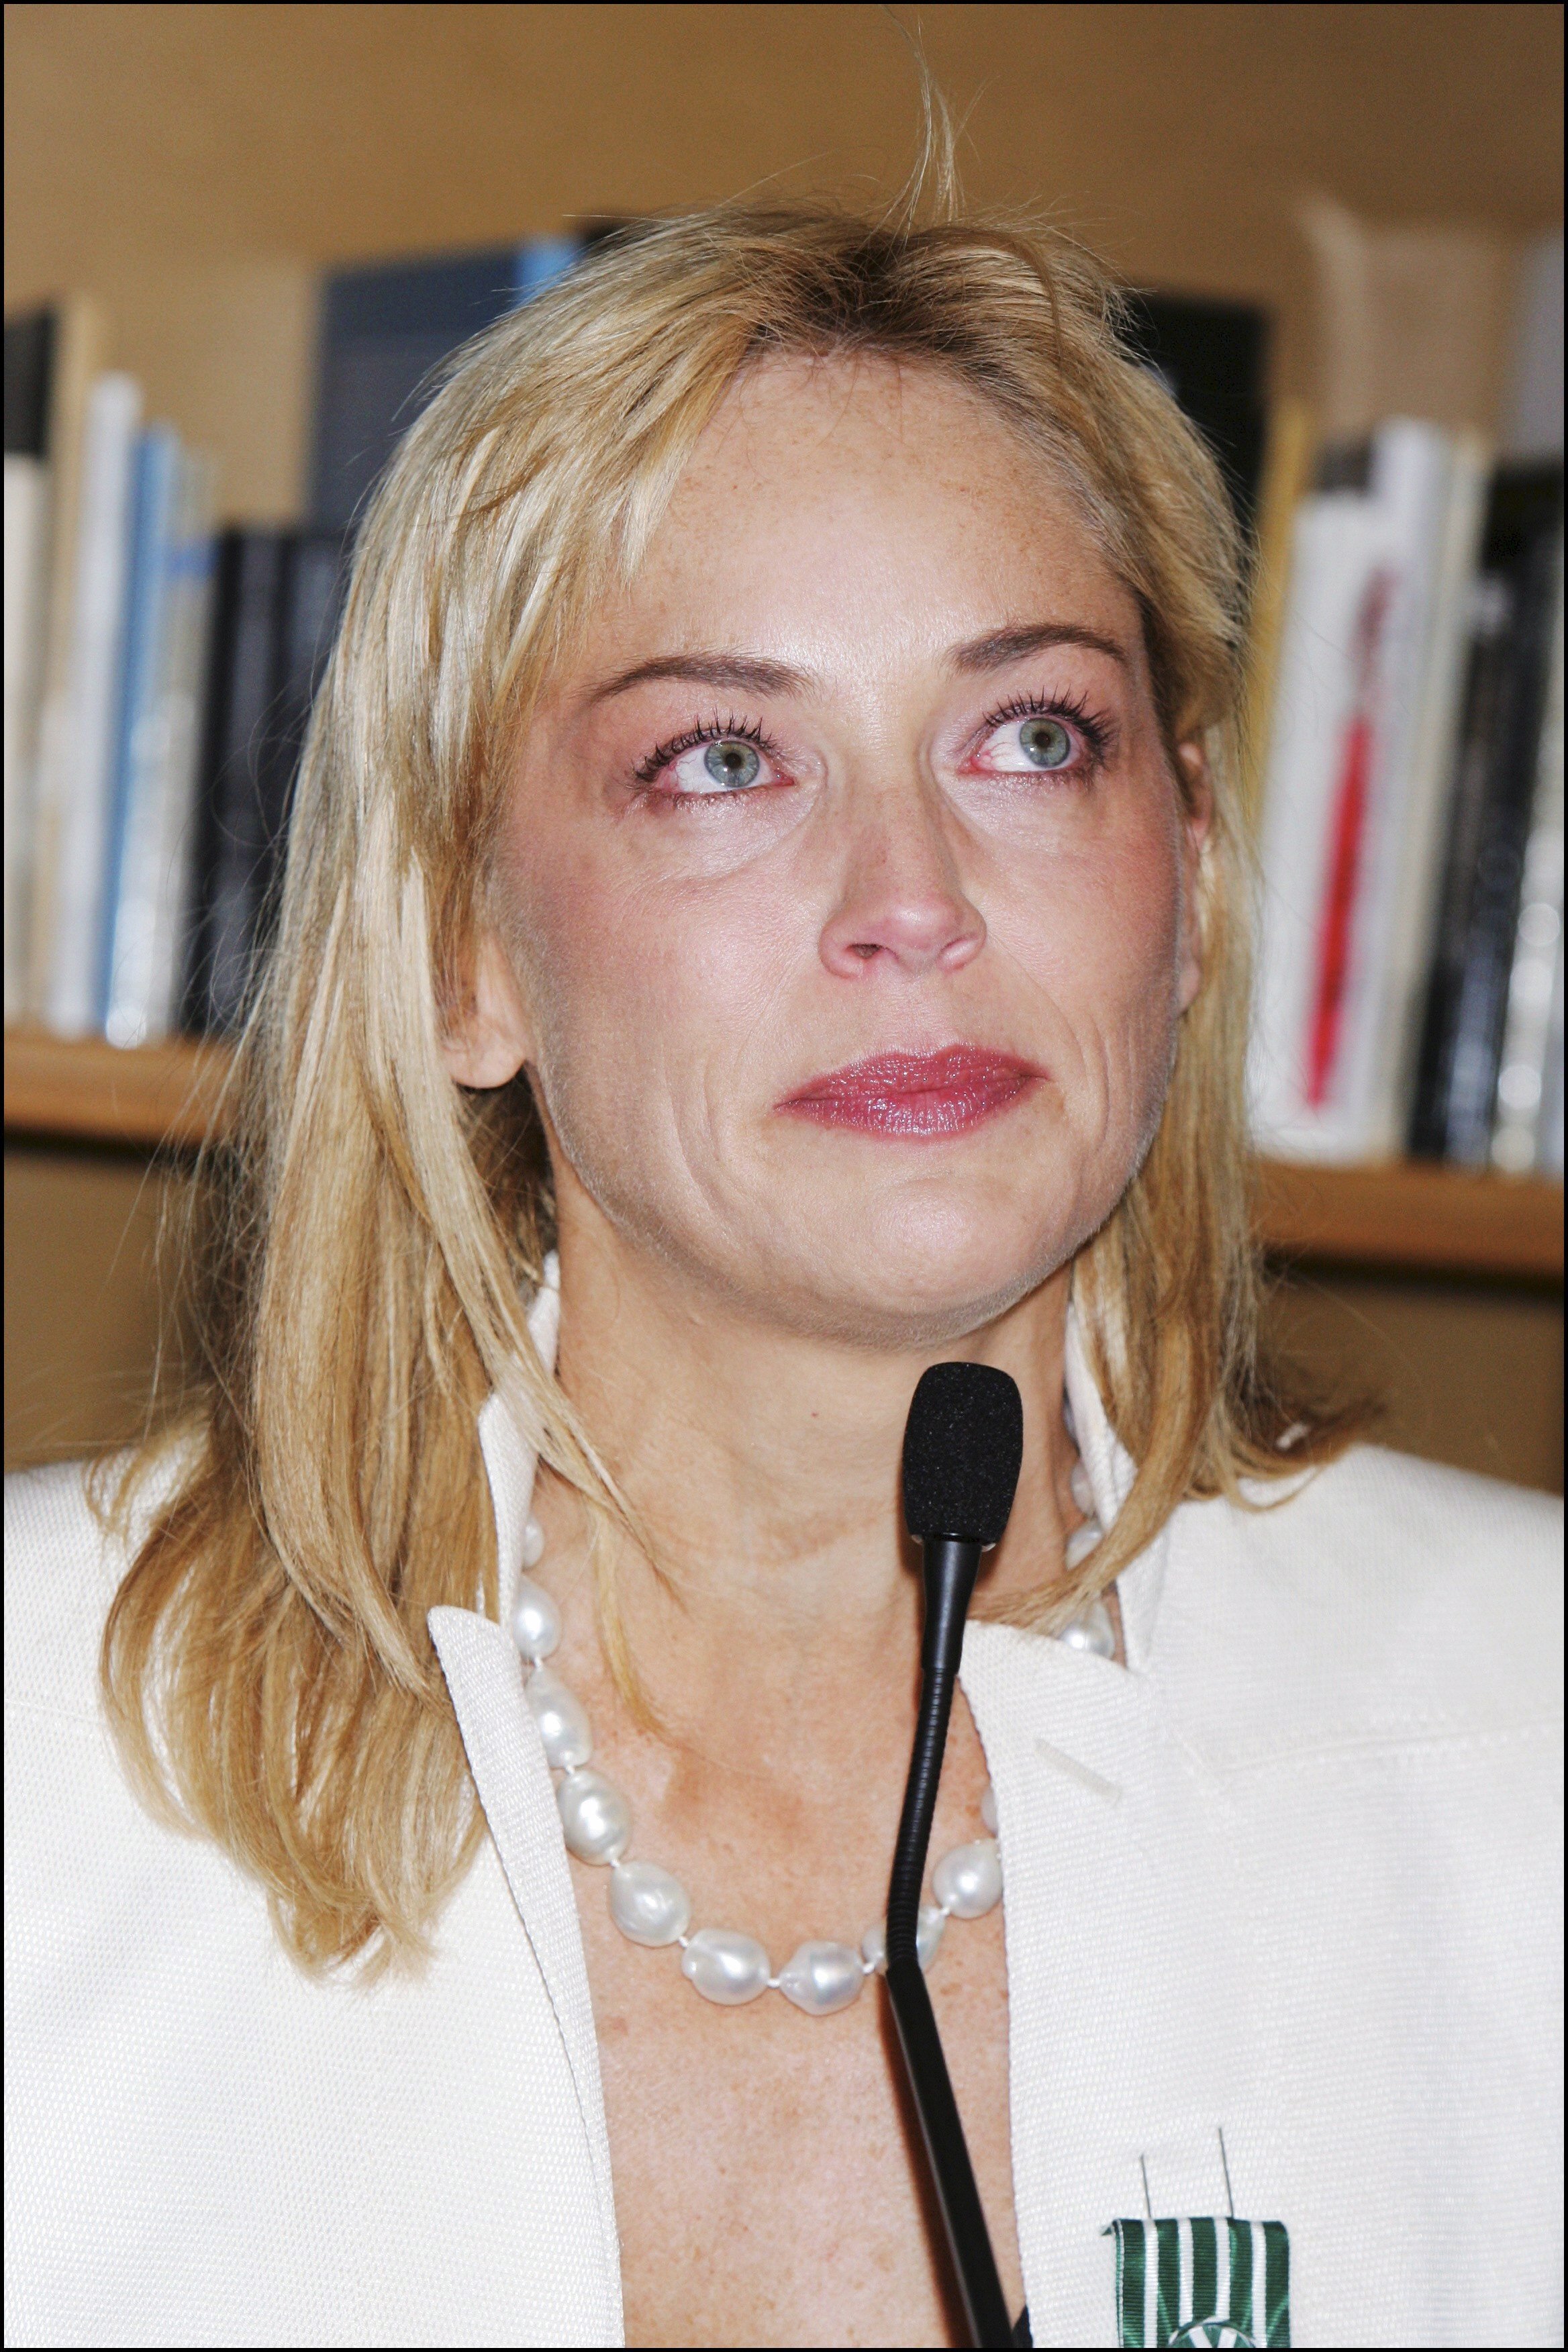 Sharon Stone awarded "Chevalier des arts et des lettres" by Gilles Jacob in Cannes, France on May 20, 2005. | Source: Pool BENAINOUS/CATARINA/LEGRAND/Gamma-Rapho/Getty Images